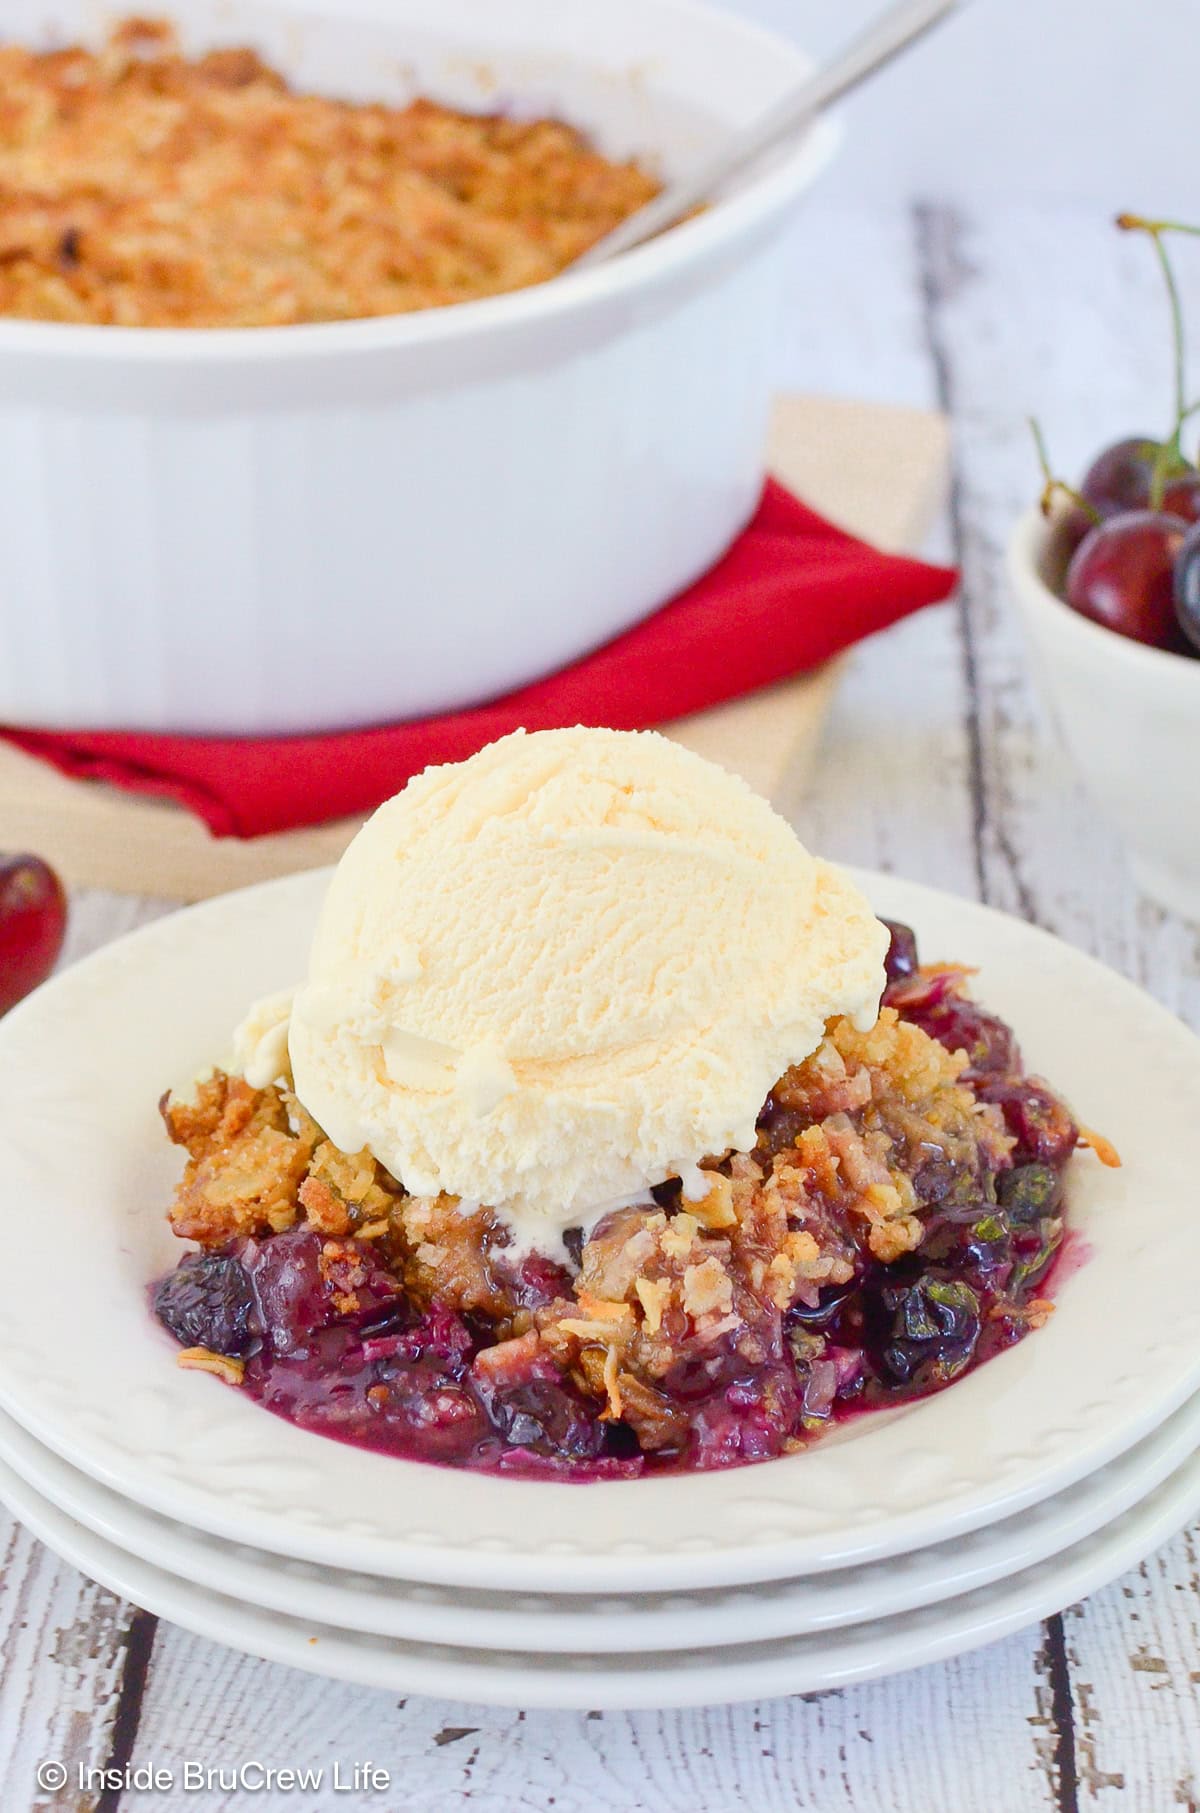 A serving of berry cherry crisp topped with vanilla ice cream.